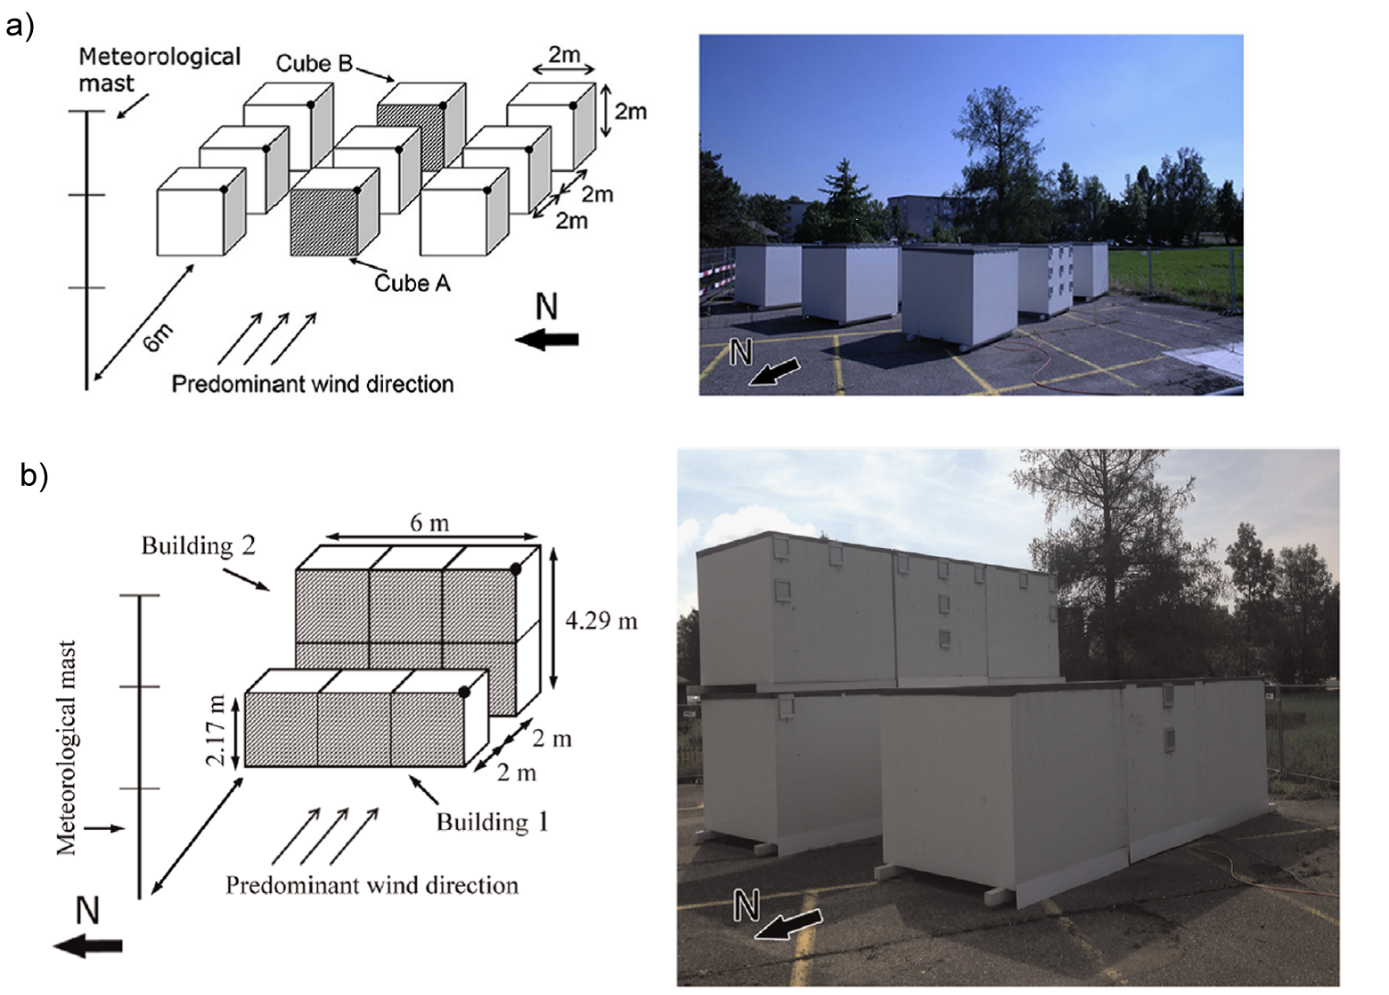 Enlarged view: Geometries of a) regular cubic array and b) parallel building models for WDR field measurements. 